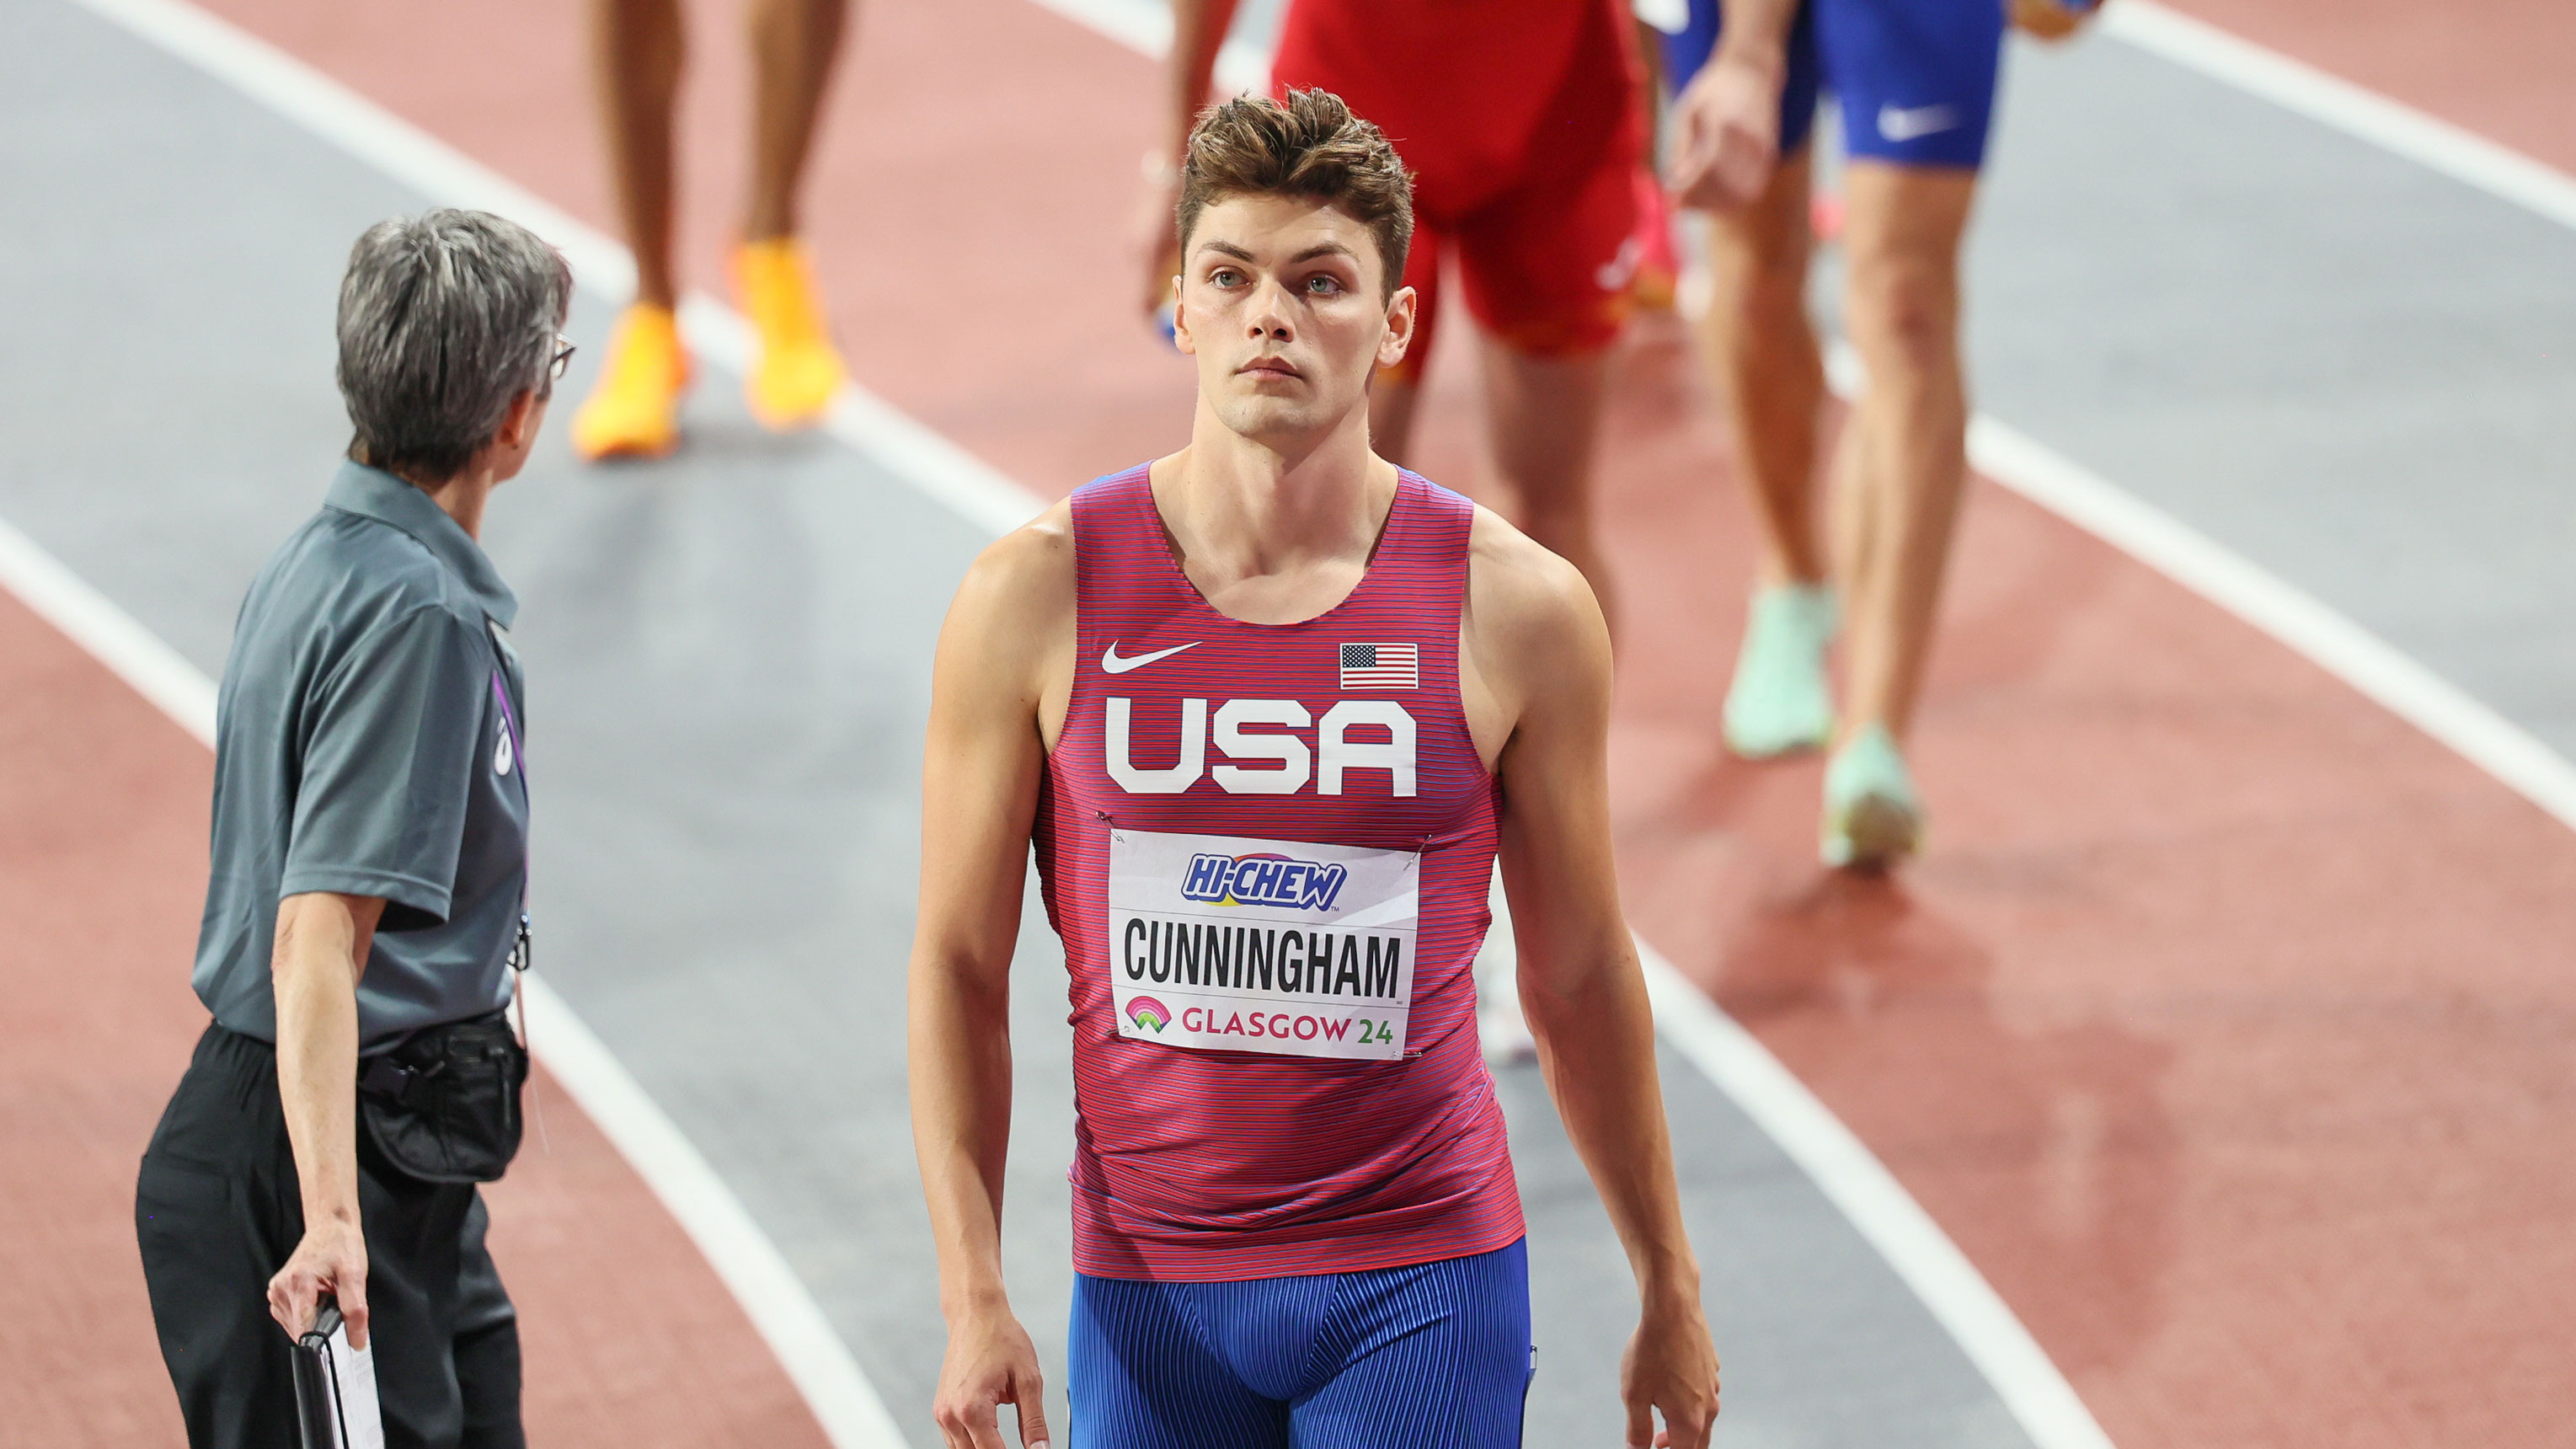 US track star Trey Cunningham comes out as gay